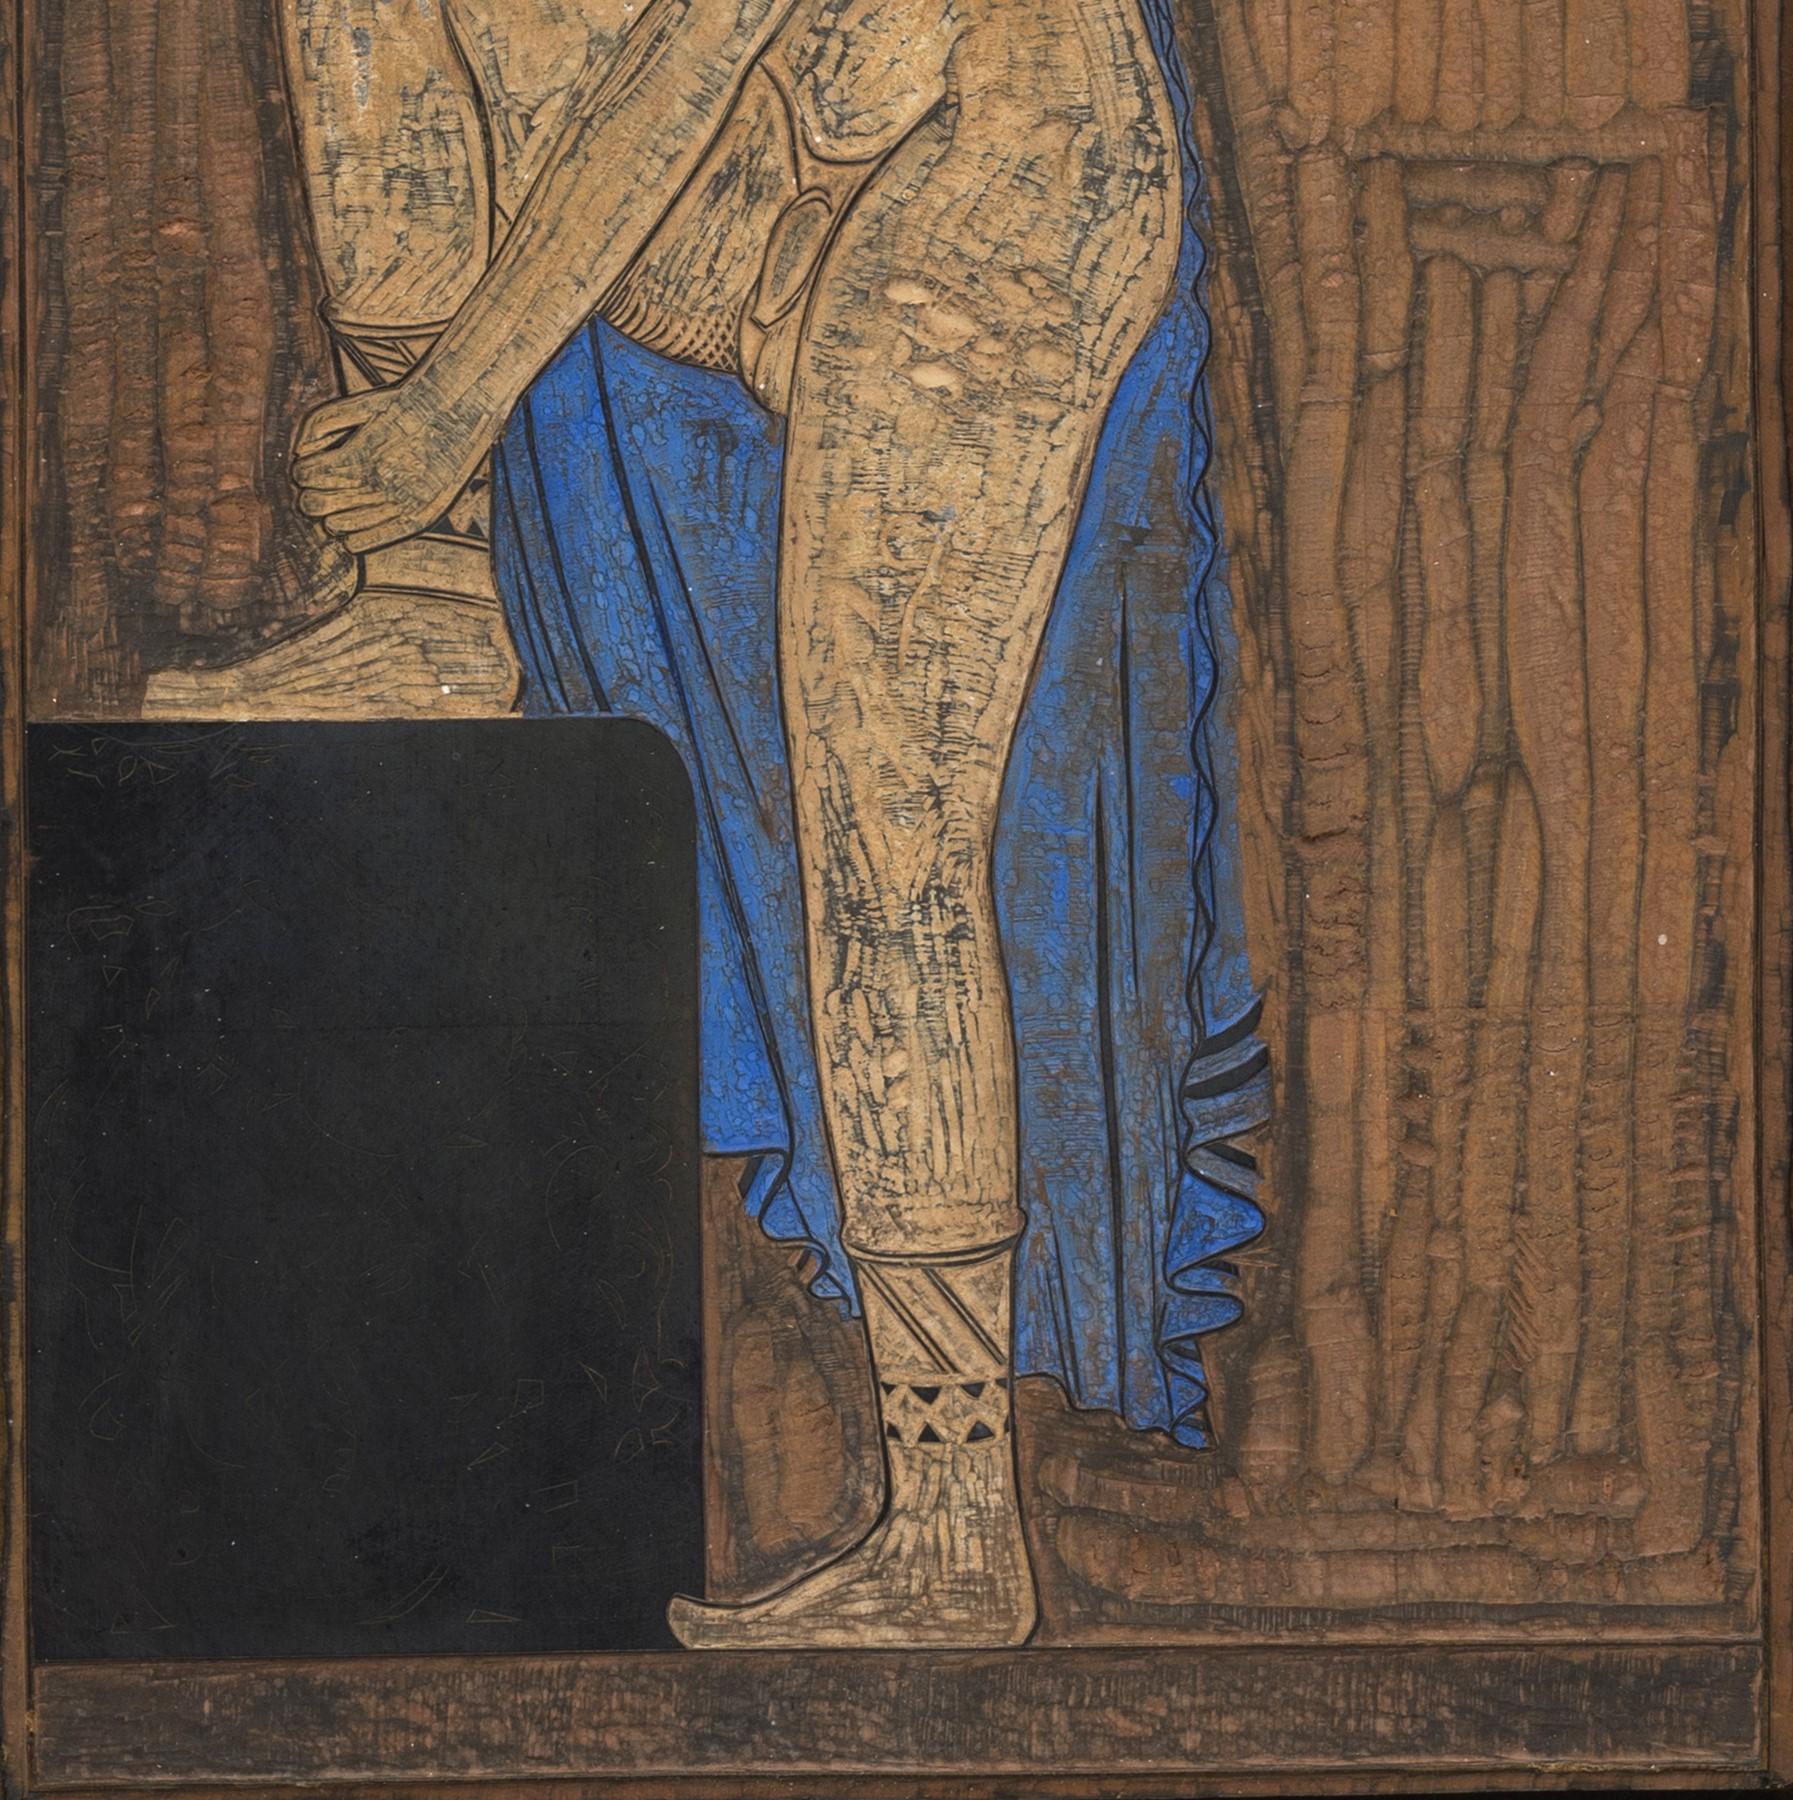 Painted engraved wood, 20.5cm x 13.5cm, (41cm x 34cm framed).  (Provenance: Félix Marcilhac, a French art historian who collected Art Deco objects; Sotheby’s, Paris, 11 March 2014)

A painter, wood engraver, printer, editor, illustrator, and